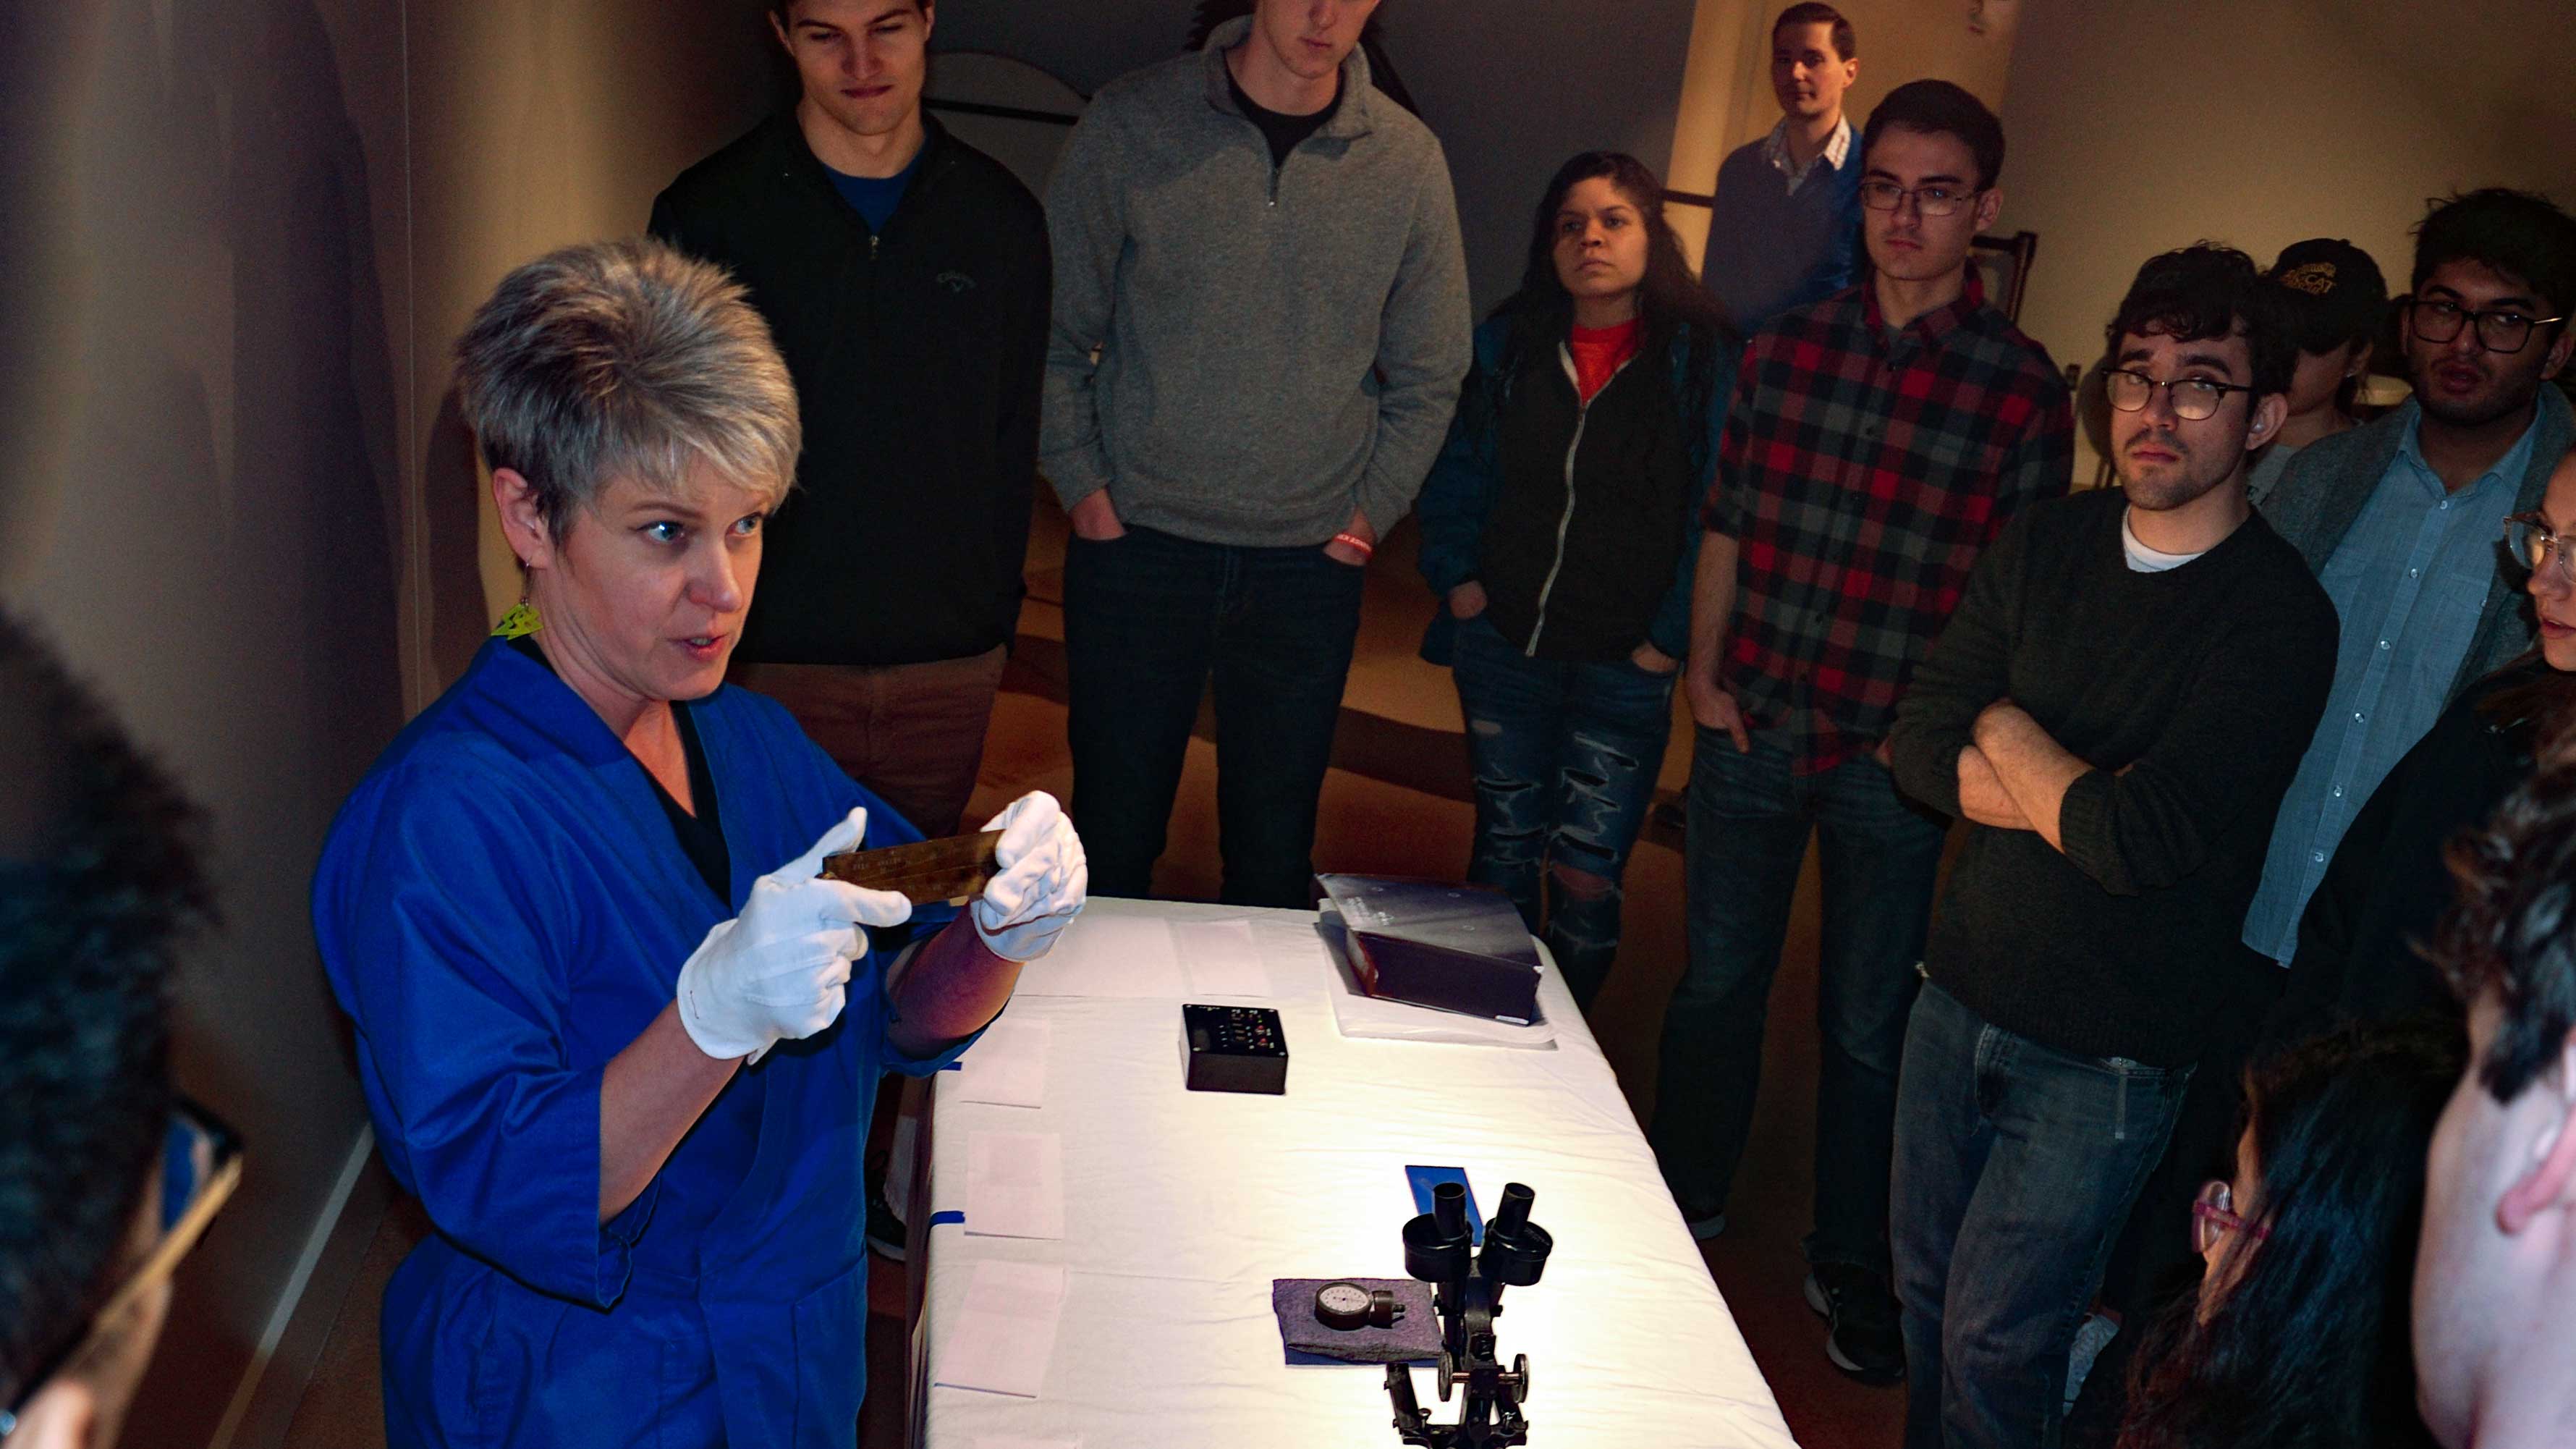 museum staff speaks to students gathered around a table with a microscope